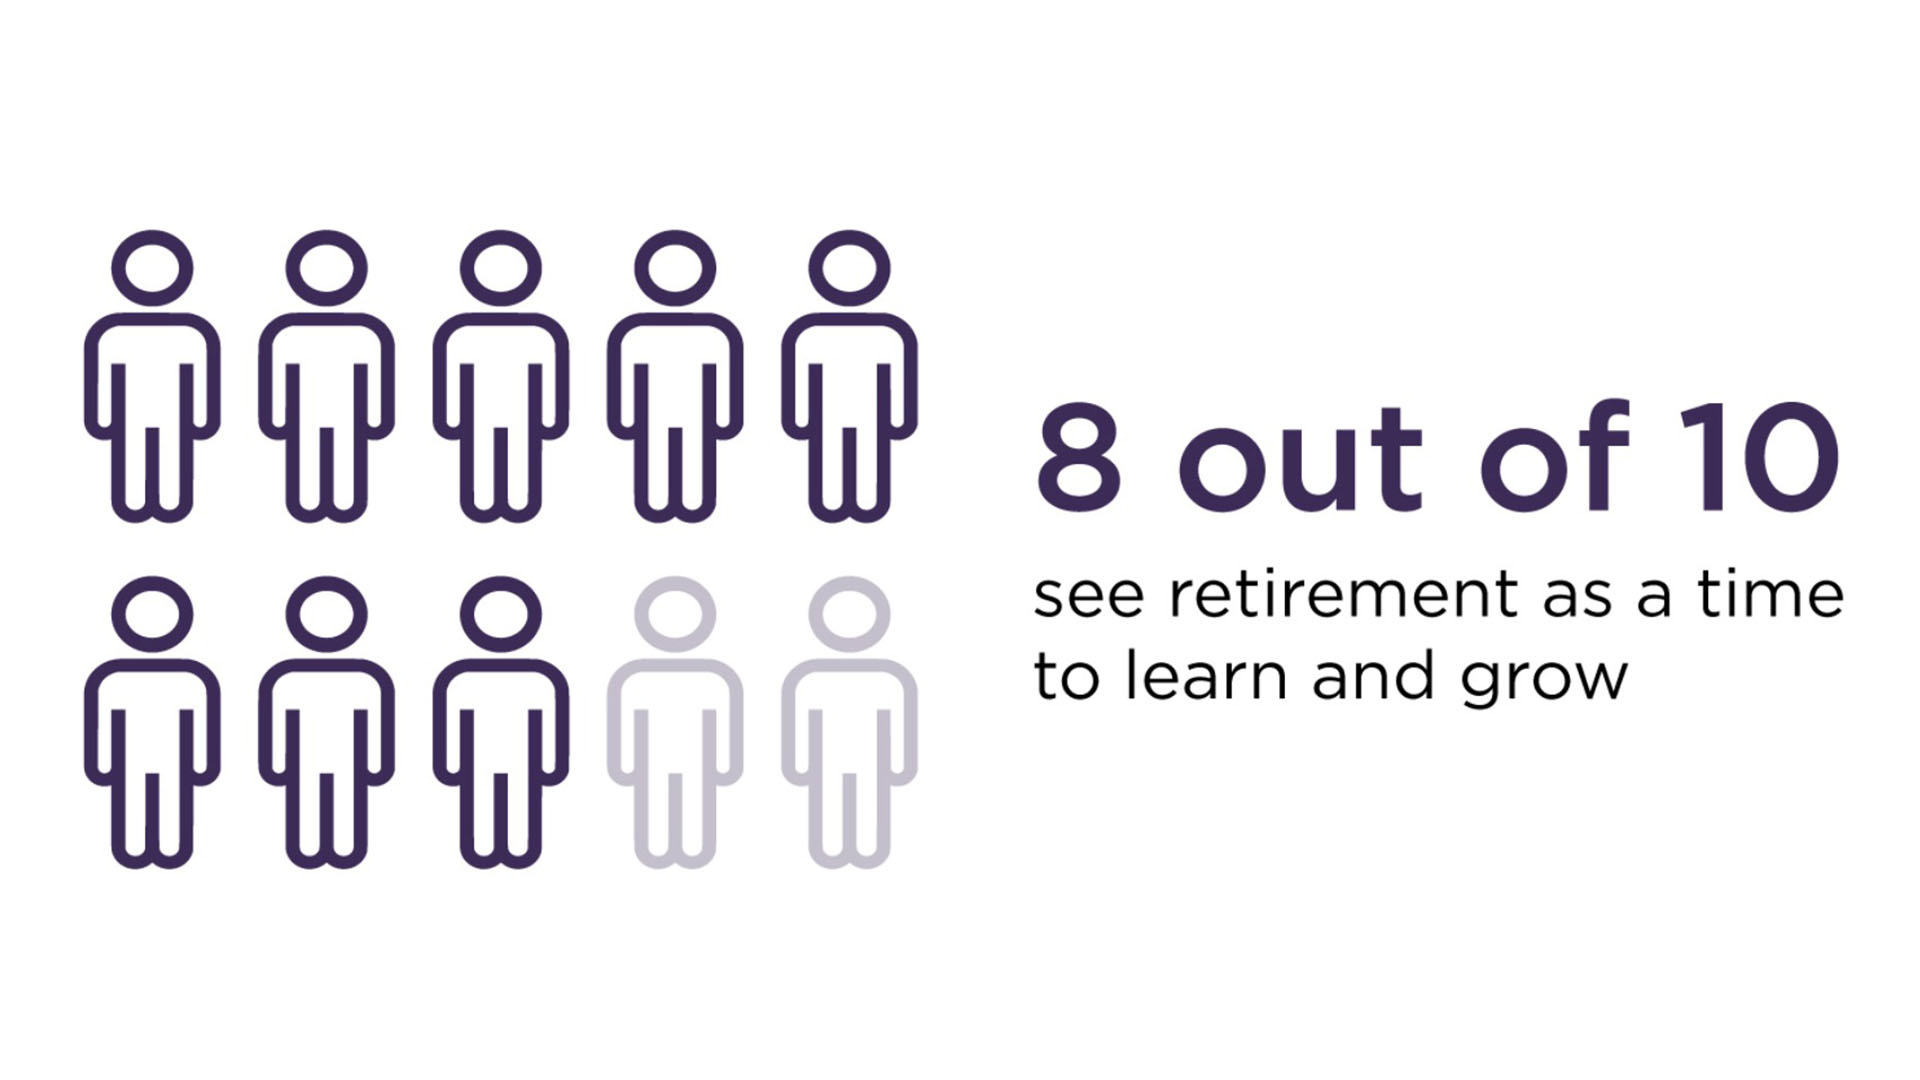 Infographic showing 8 out of 10 Singaporeans see retirement as a time to learn and grow